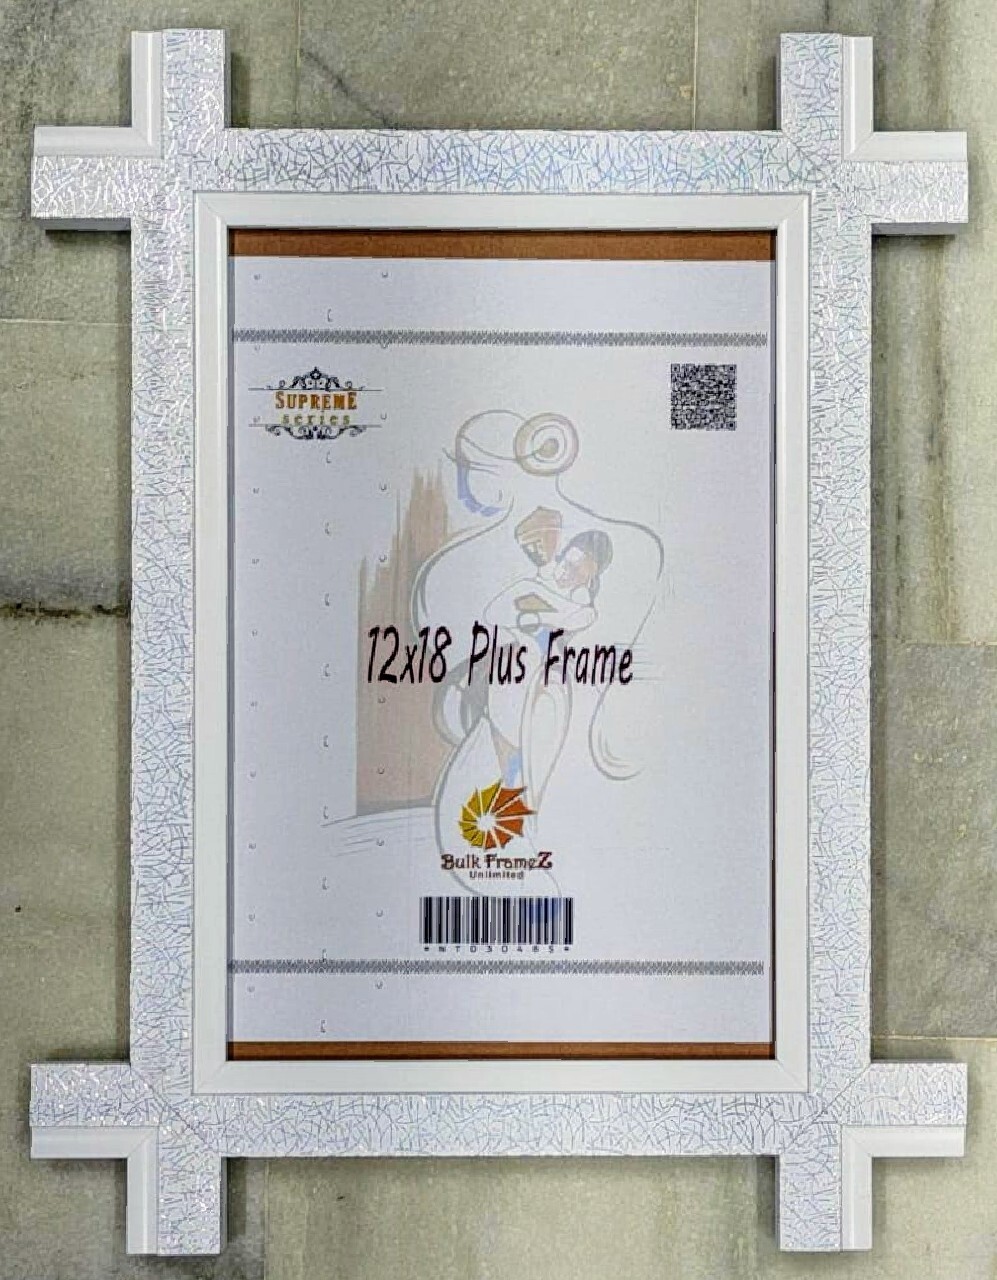 Plus Photo Frames 12" x 18" White color (Select Frame Size and Upload your Photo here)